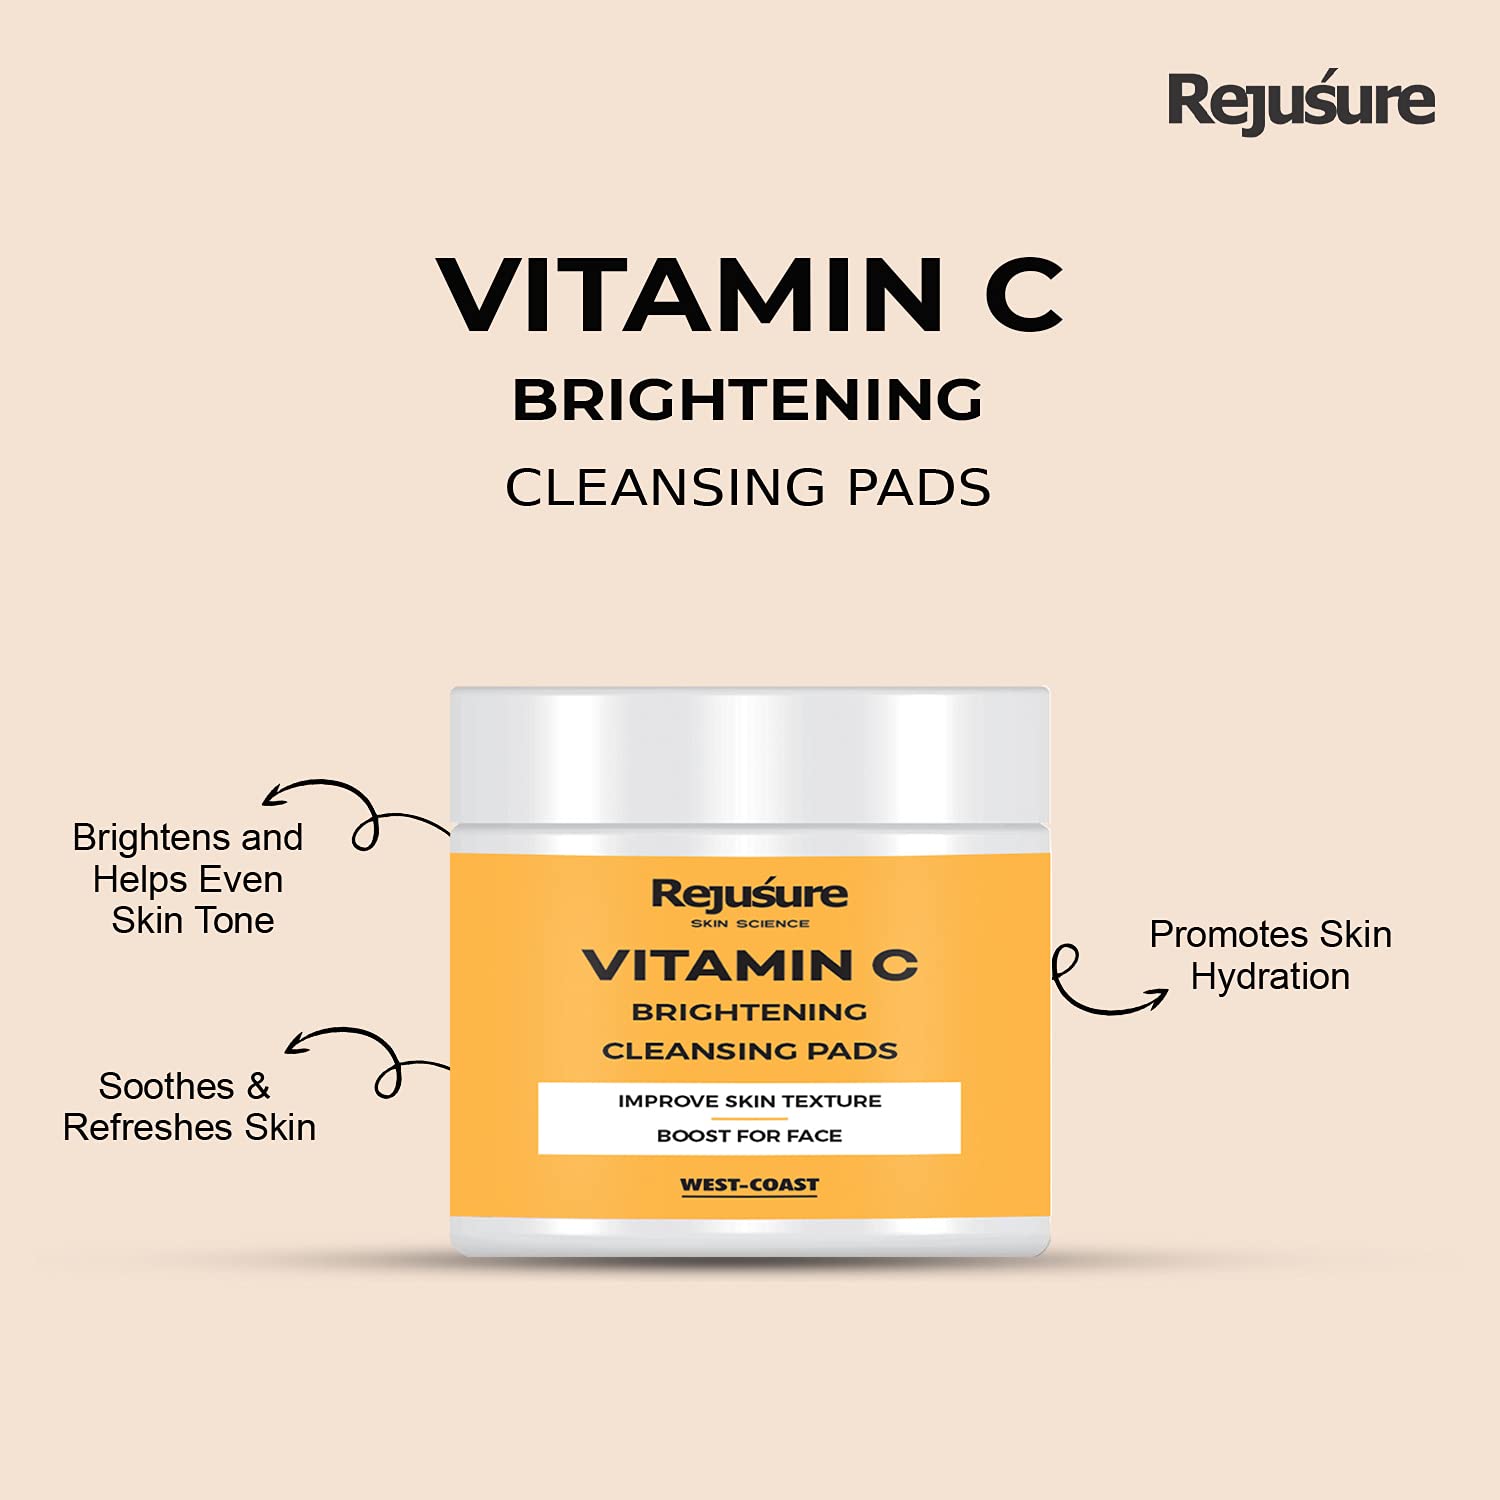 Rejusure Vitamin C Brightening Cleansing Pads Improve Skin Texture & Boost for Face |Paraben & Sulphate Free -50 Pads